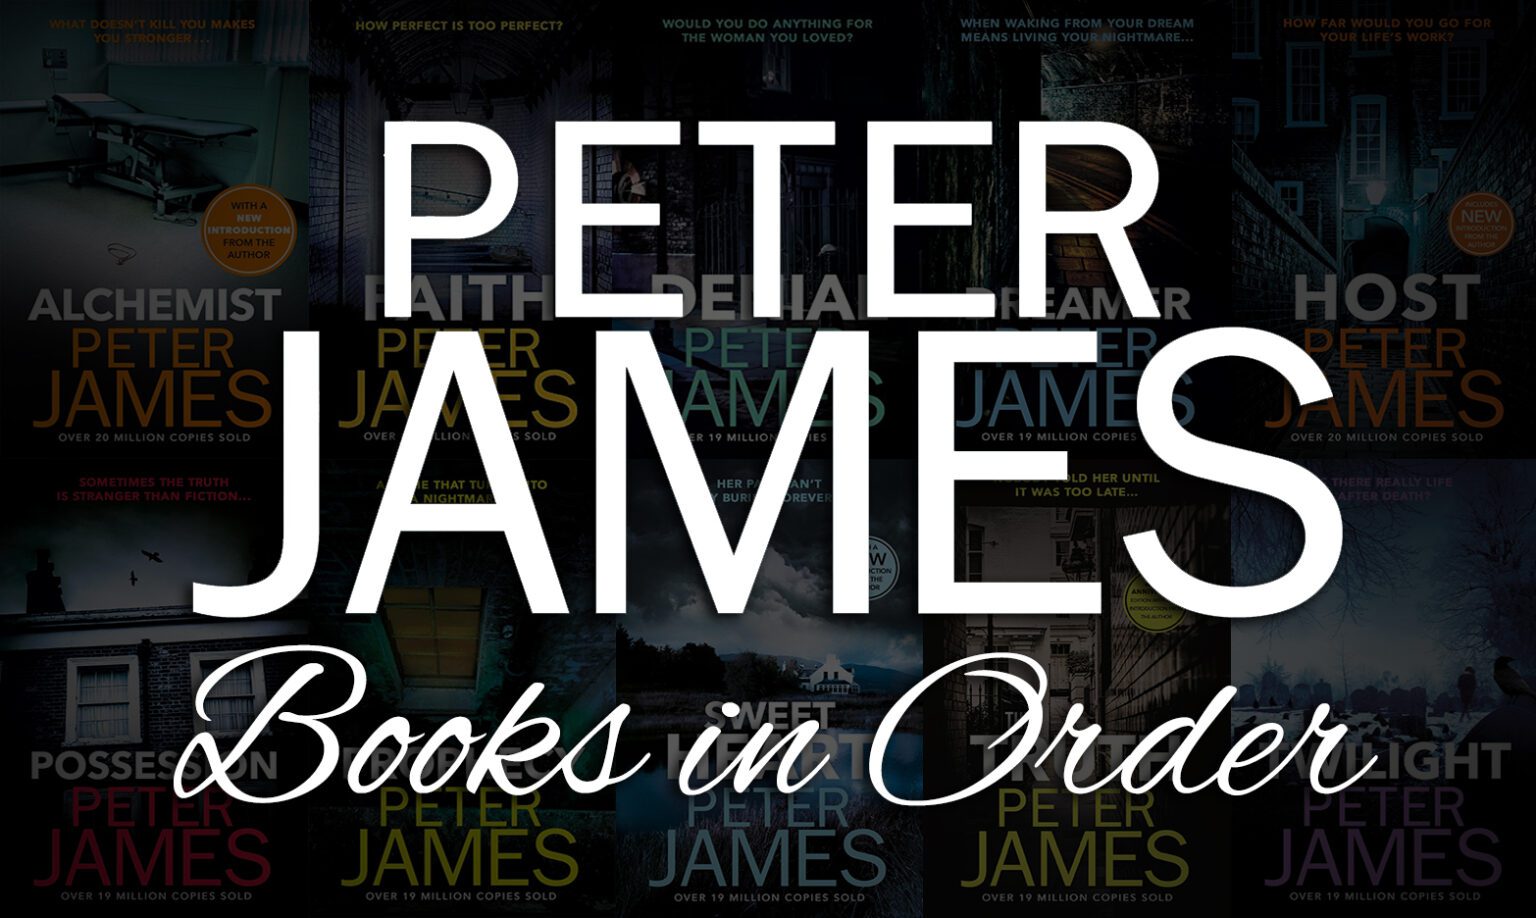 Peter James Books in Order Guide 36+ Books]